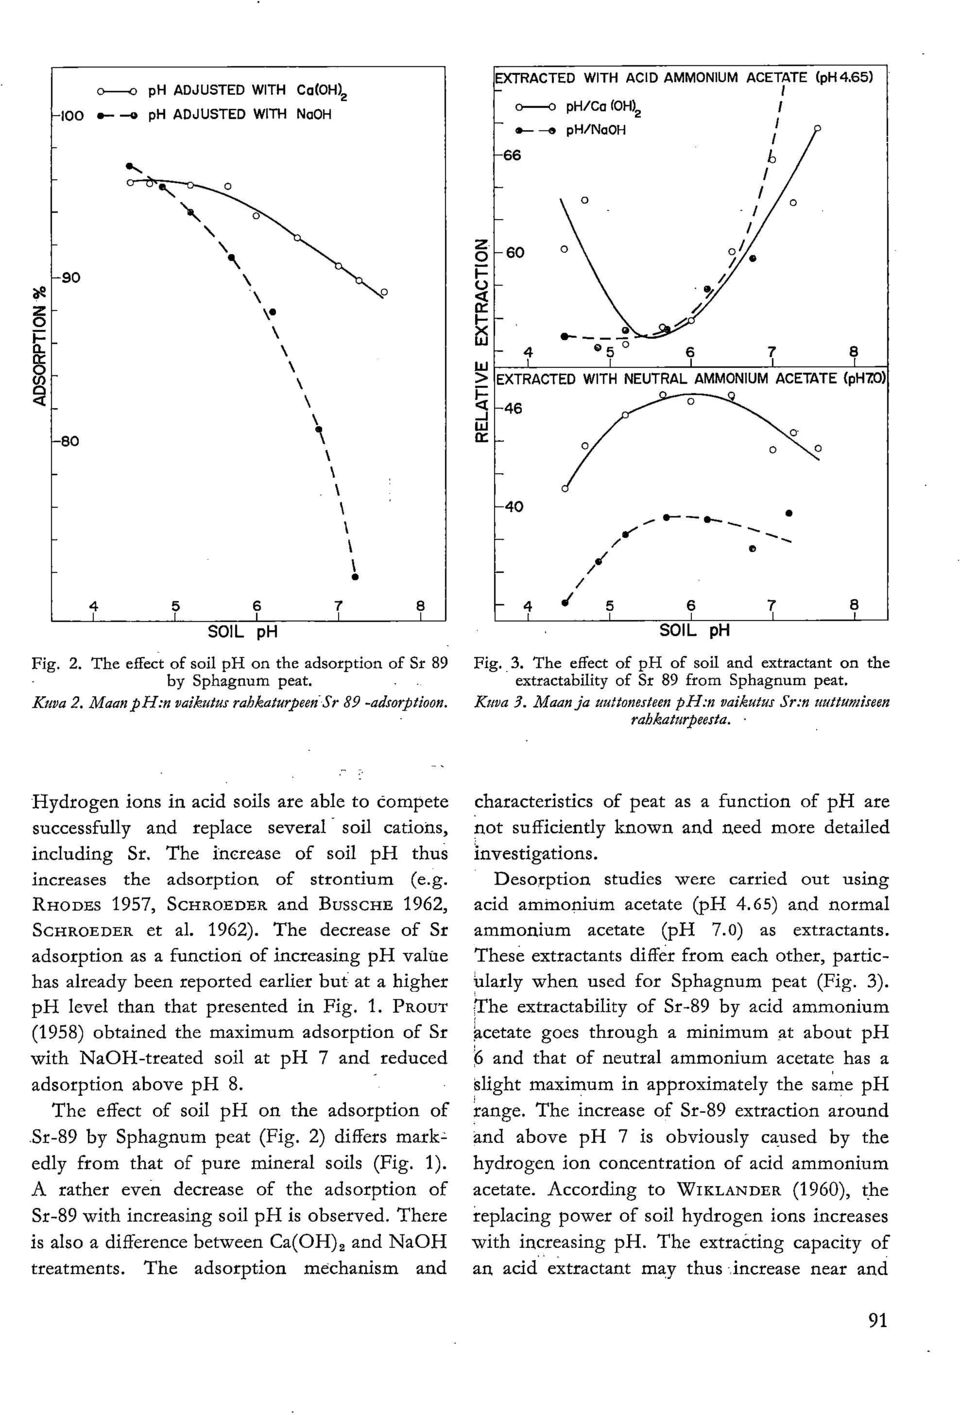 Maan.pH:n vaikutus rahkaturpeen Sr 89 -adsorptioon. 4 1 5 6 7 soil ph Fig. 3. The effect of ph of soil and extractant on the extractability of Sr 89 from Sphagnum peat. Kuva 3.